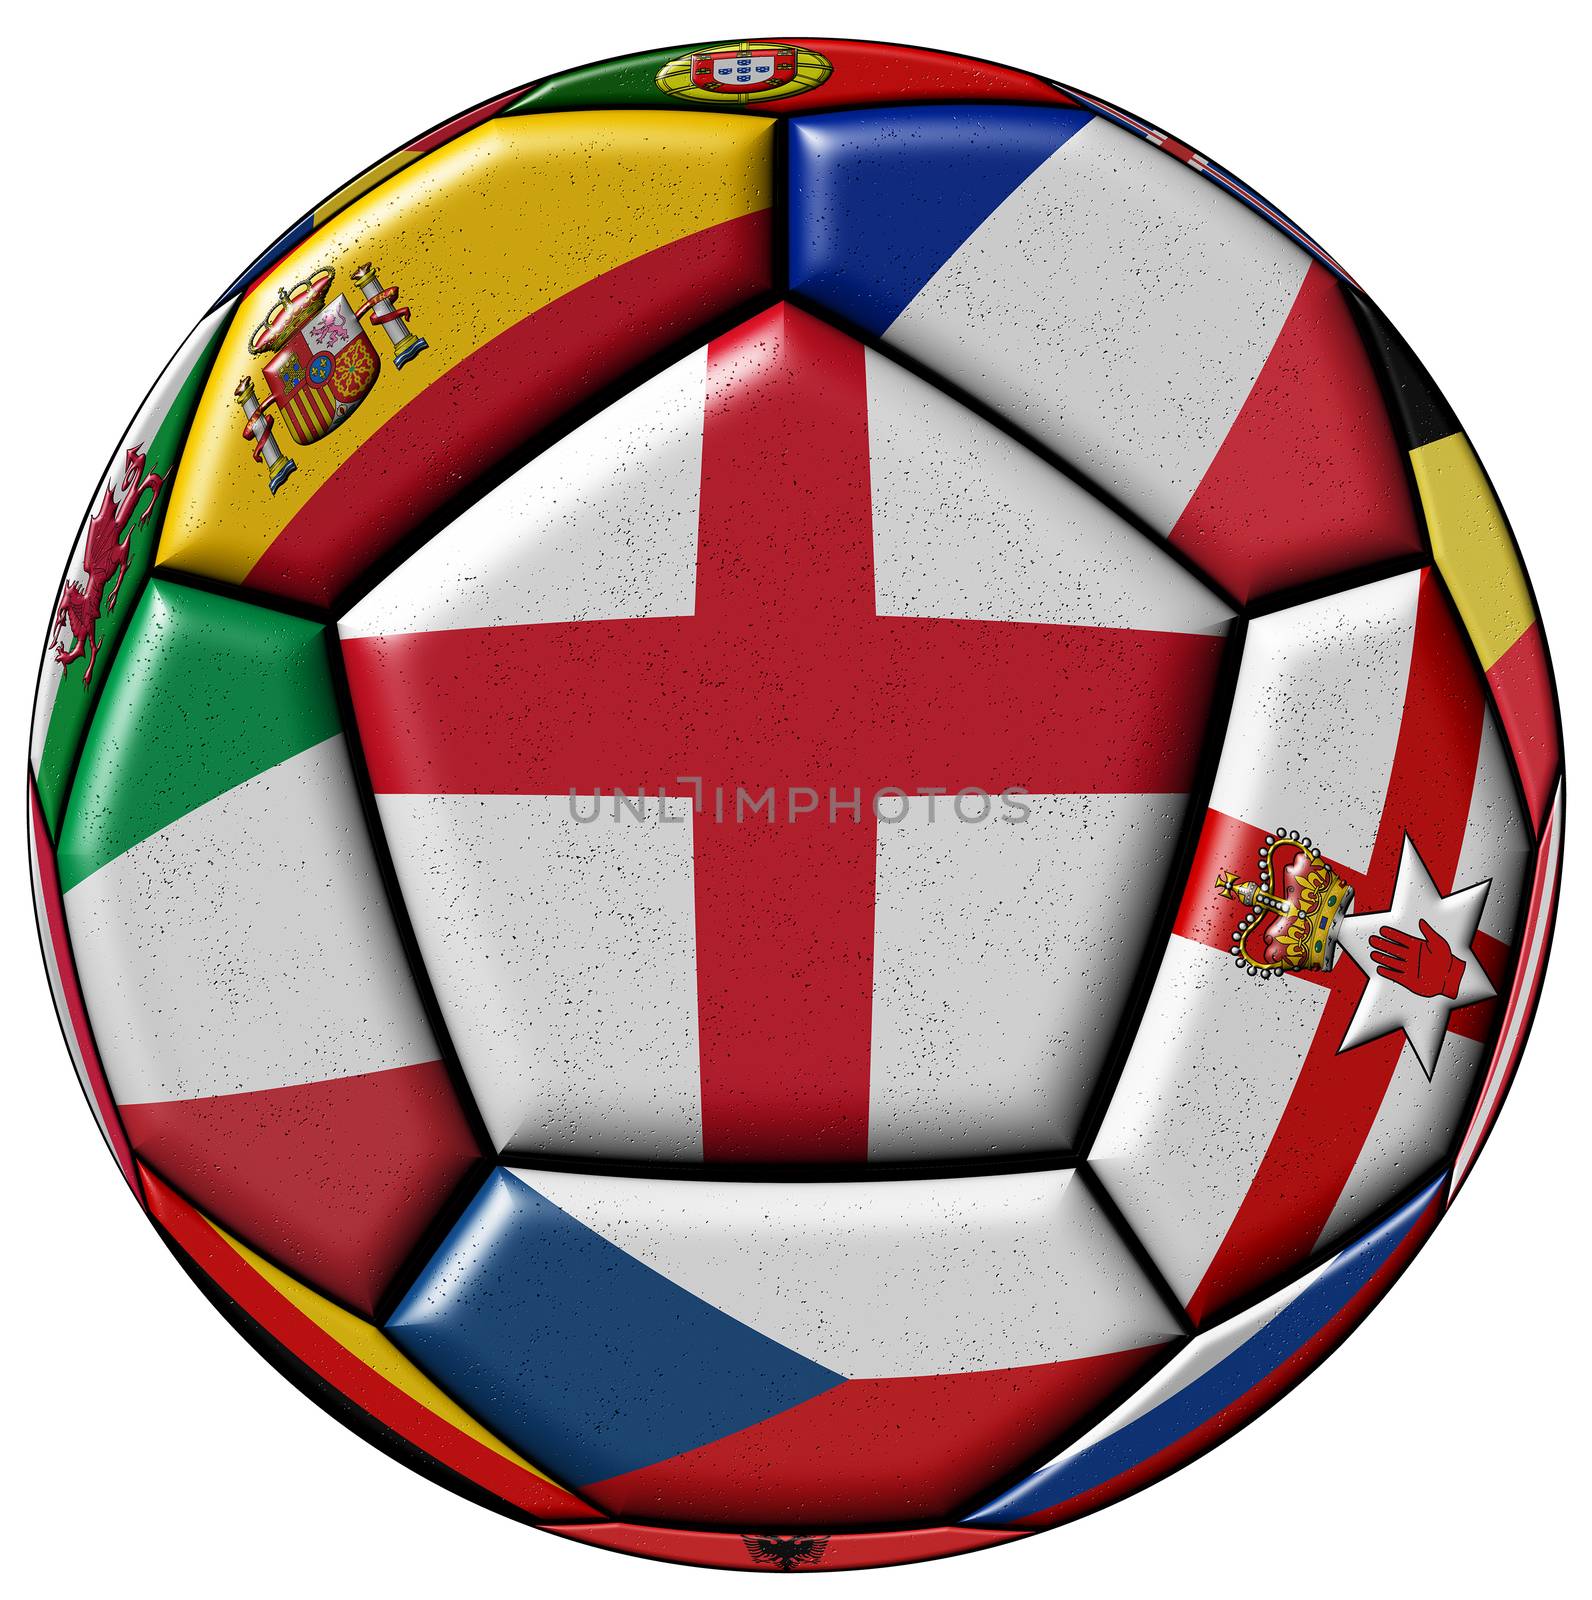 Soccer ball on white background with flag of England in the center